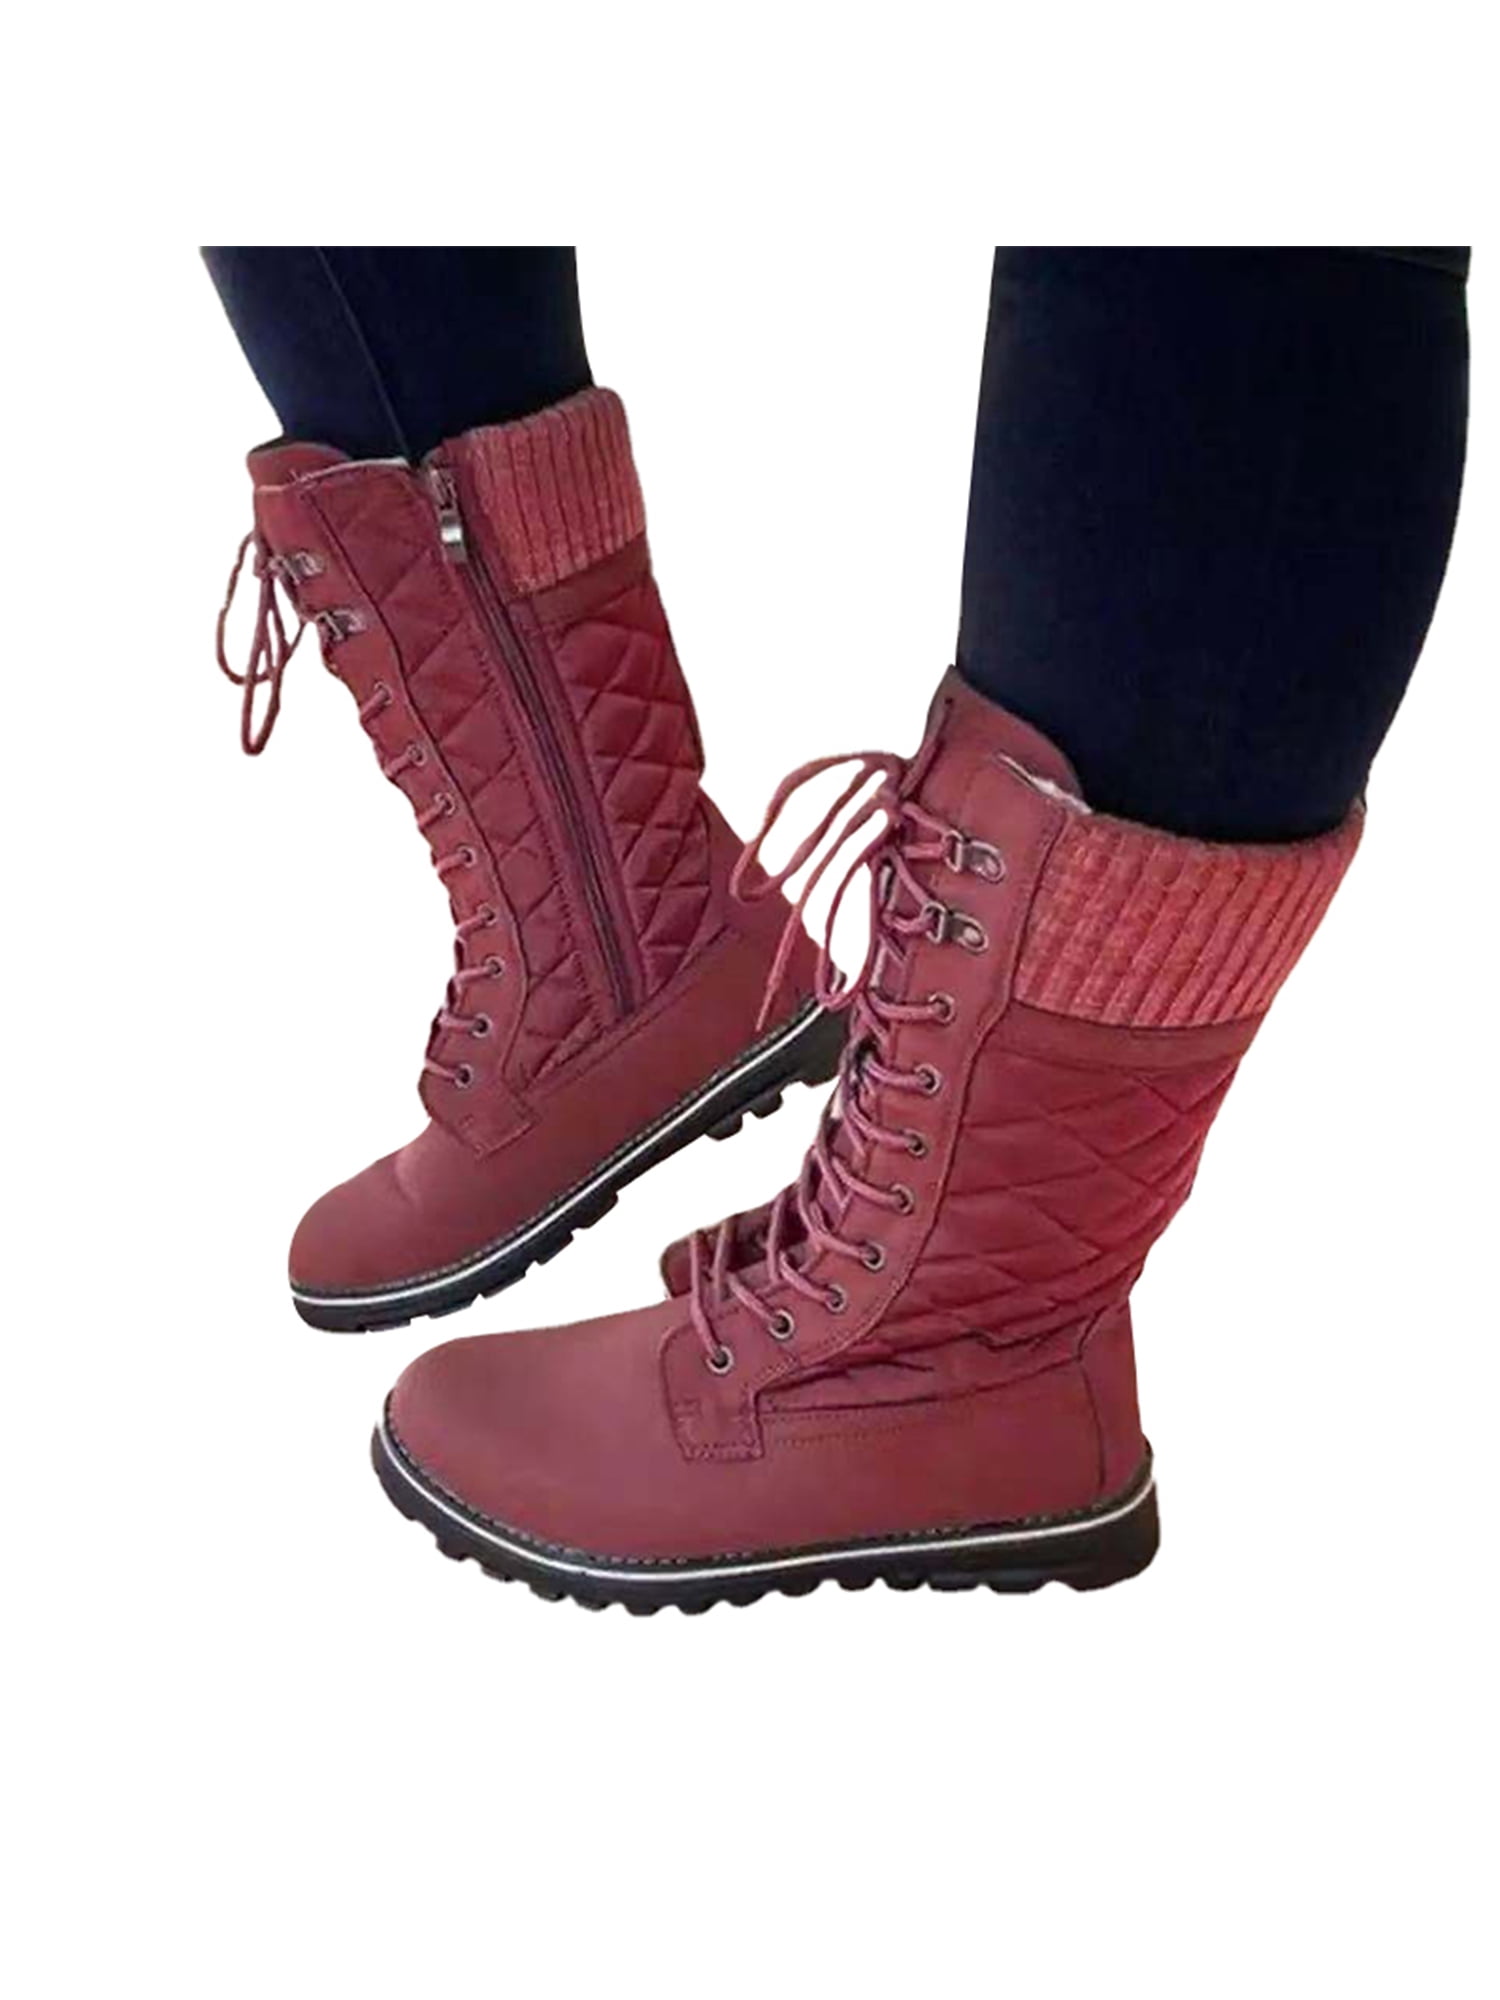 Women's Ladies Mid Calf Lace Up Boots Army Combat Military Biker Flat Shoes New 